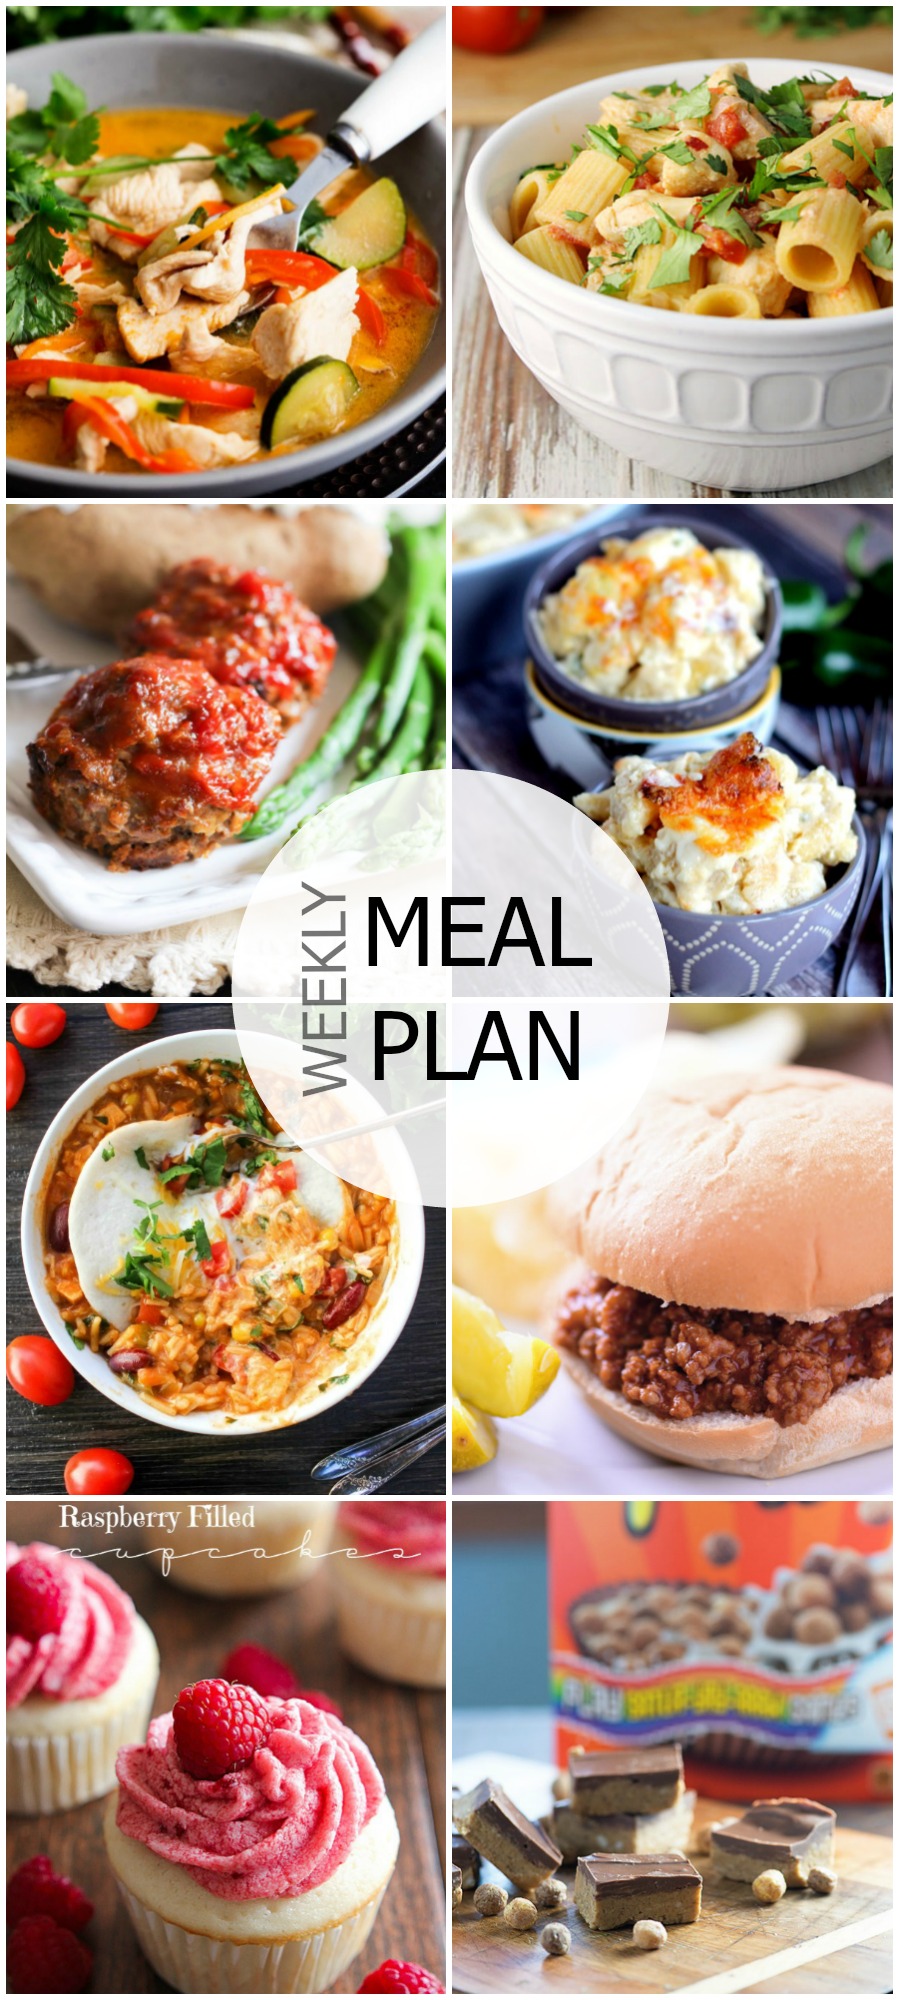 Easy Meal Plan Sunday #36